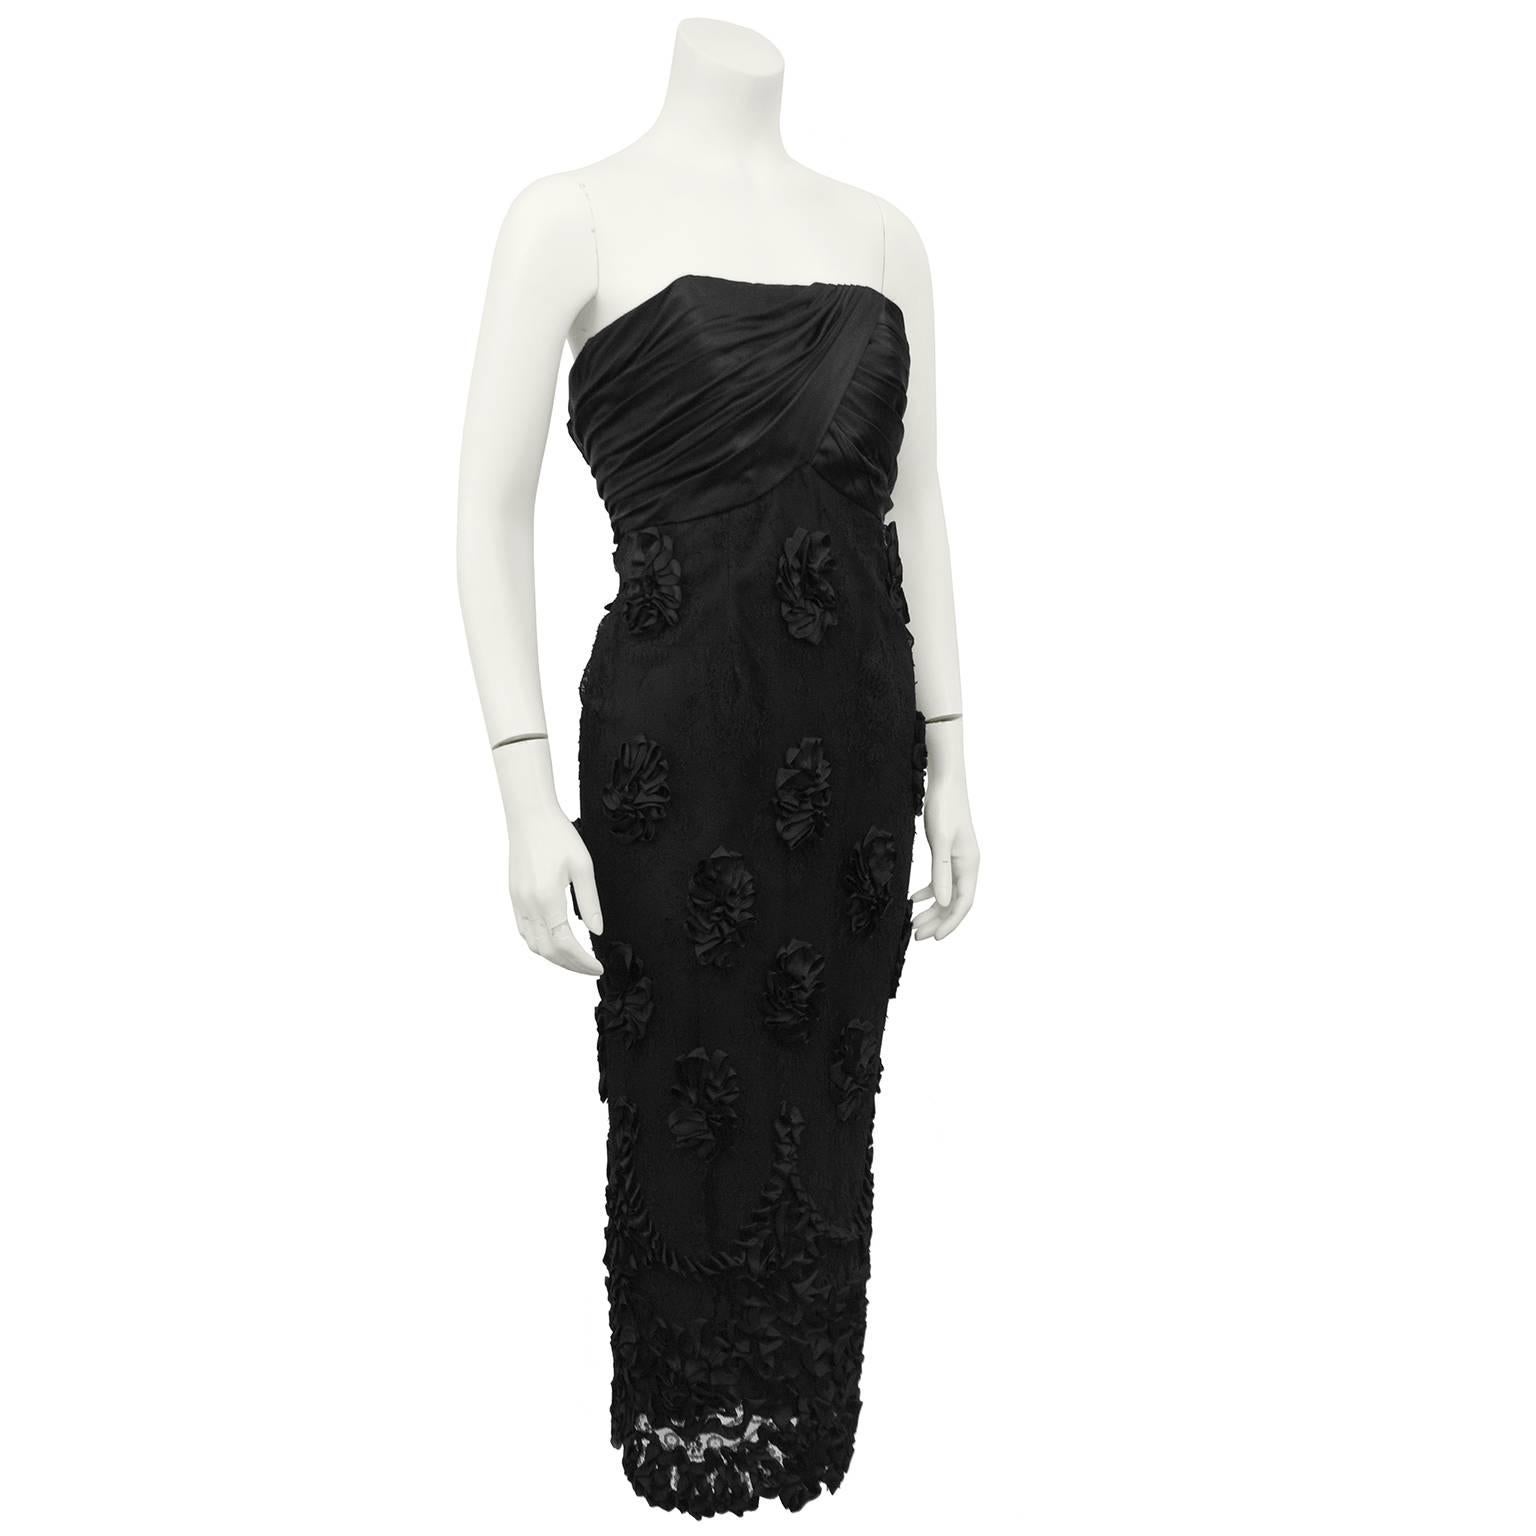 1960s black cocktail dress. Strapless and empire waist with a beautifully folded and ruched bodice. Straight, tea length skirt has a black lace overlay with large floral appliques made from black ribbons. More black ribbon applique details at bottom